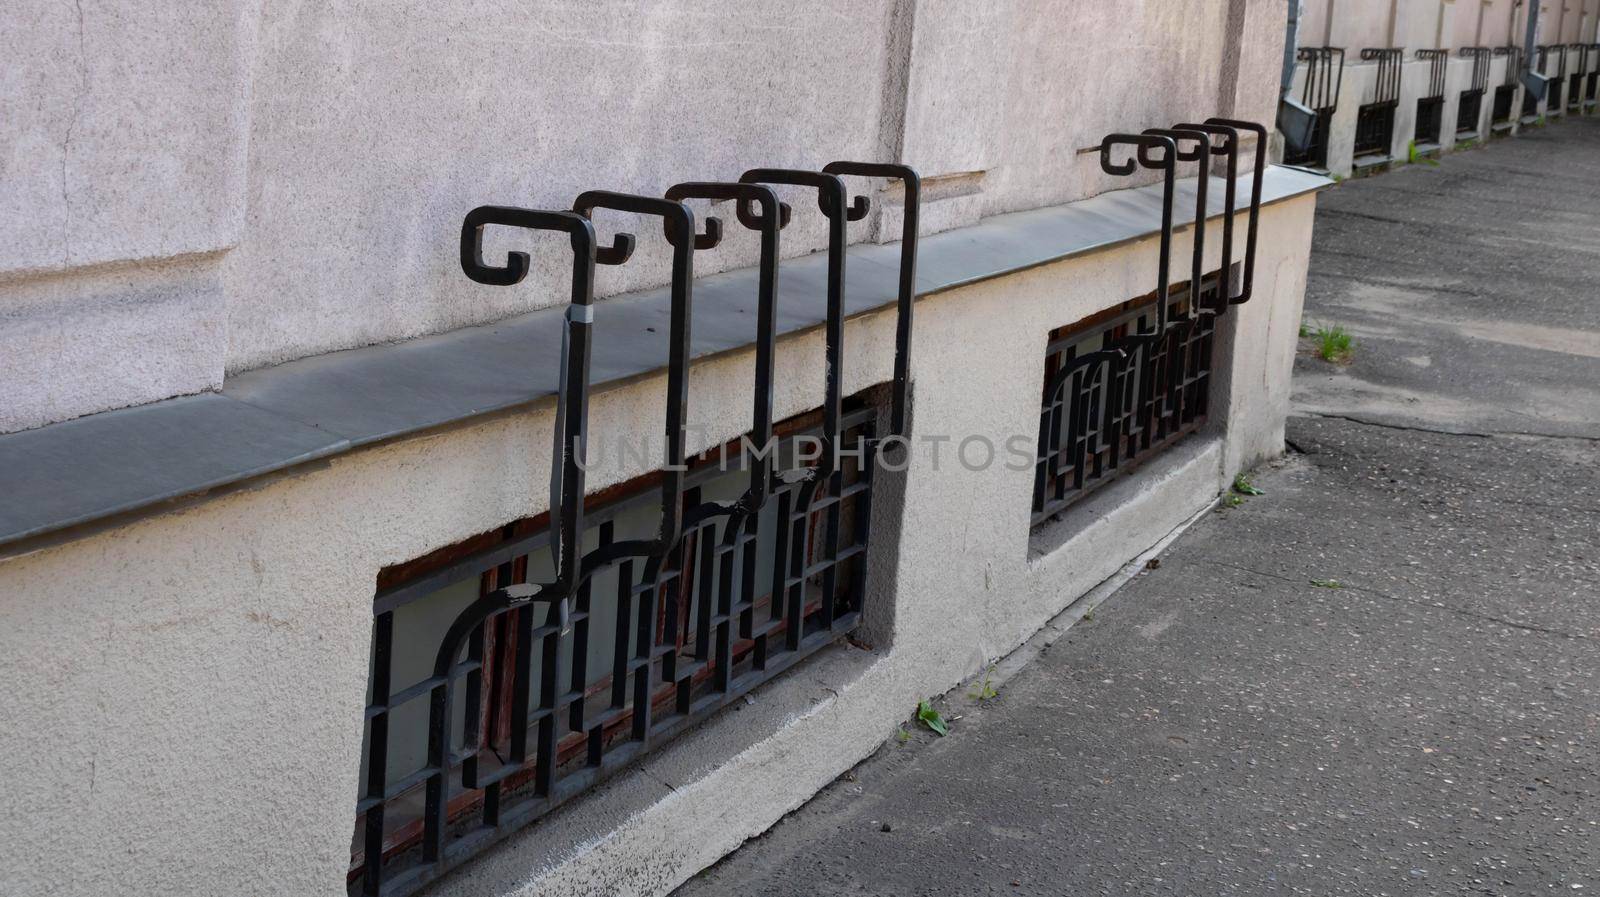 Wrought iron patterned grilles are installed outside on the first floor windows of the apartment building for safety